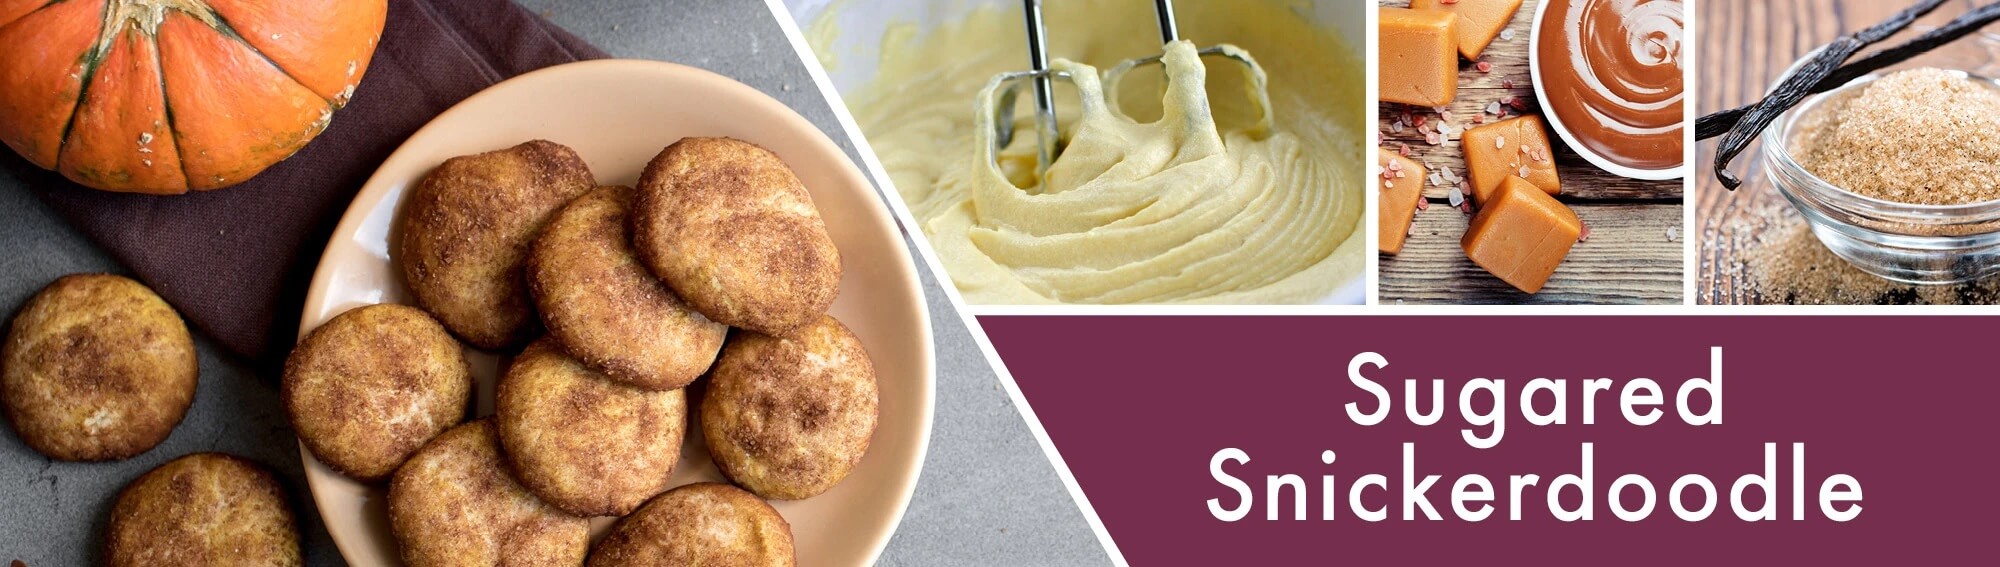 Sugared-Snickerdoodle-Banner